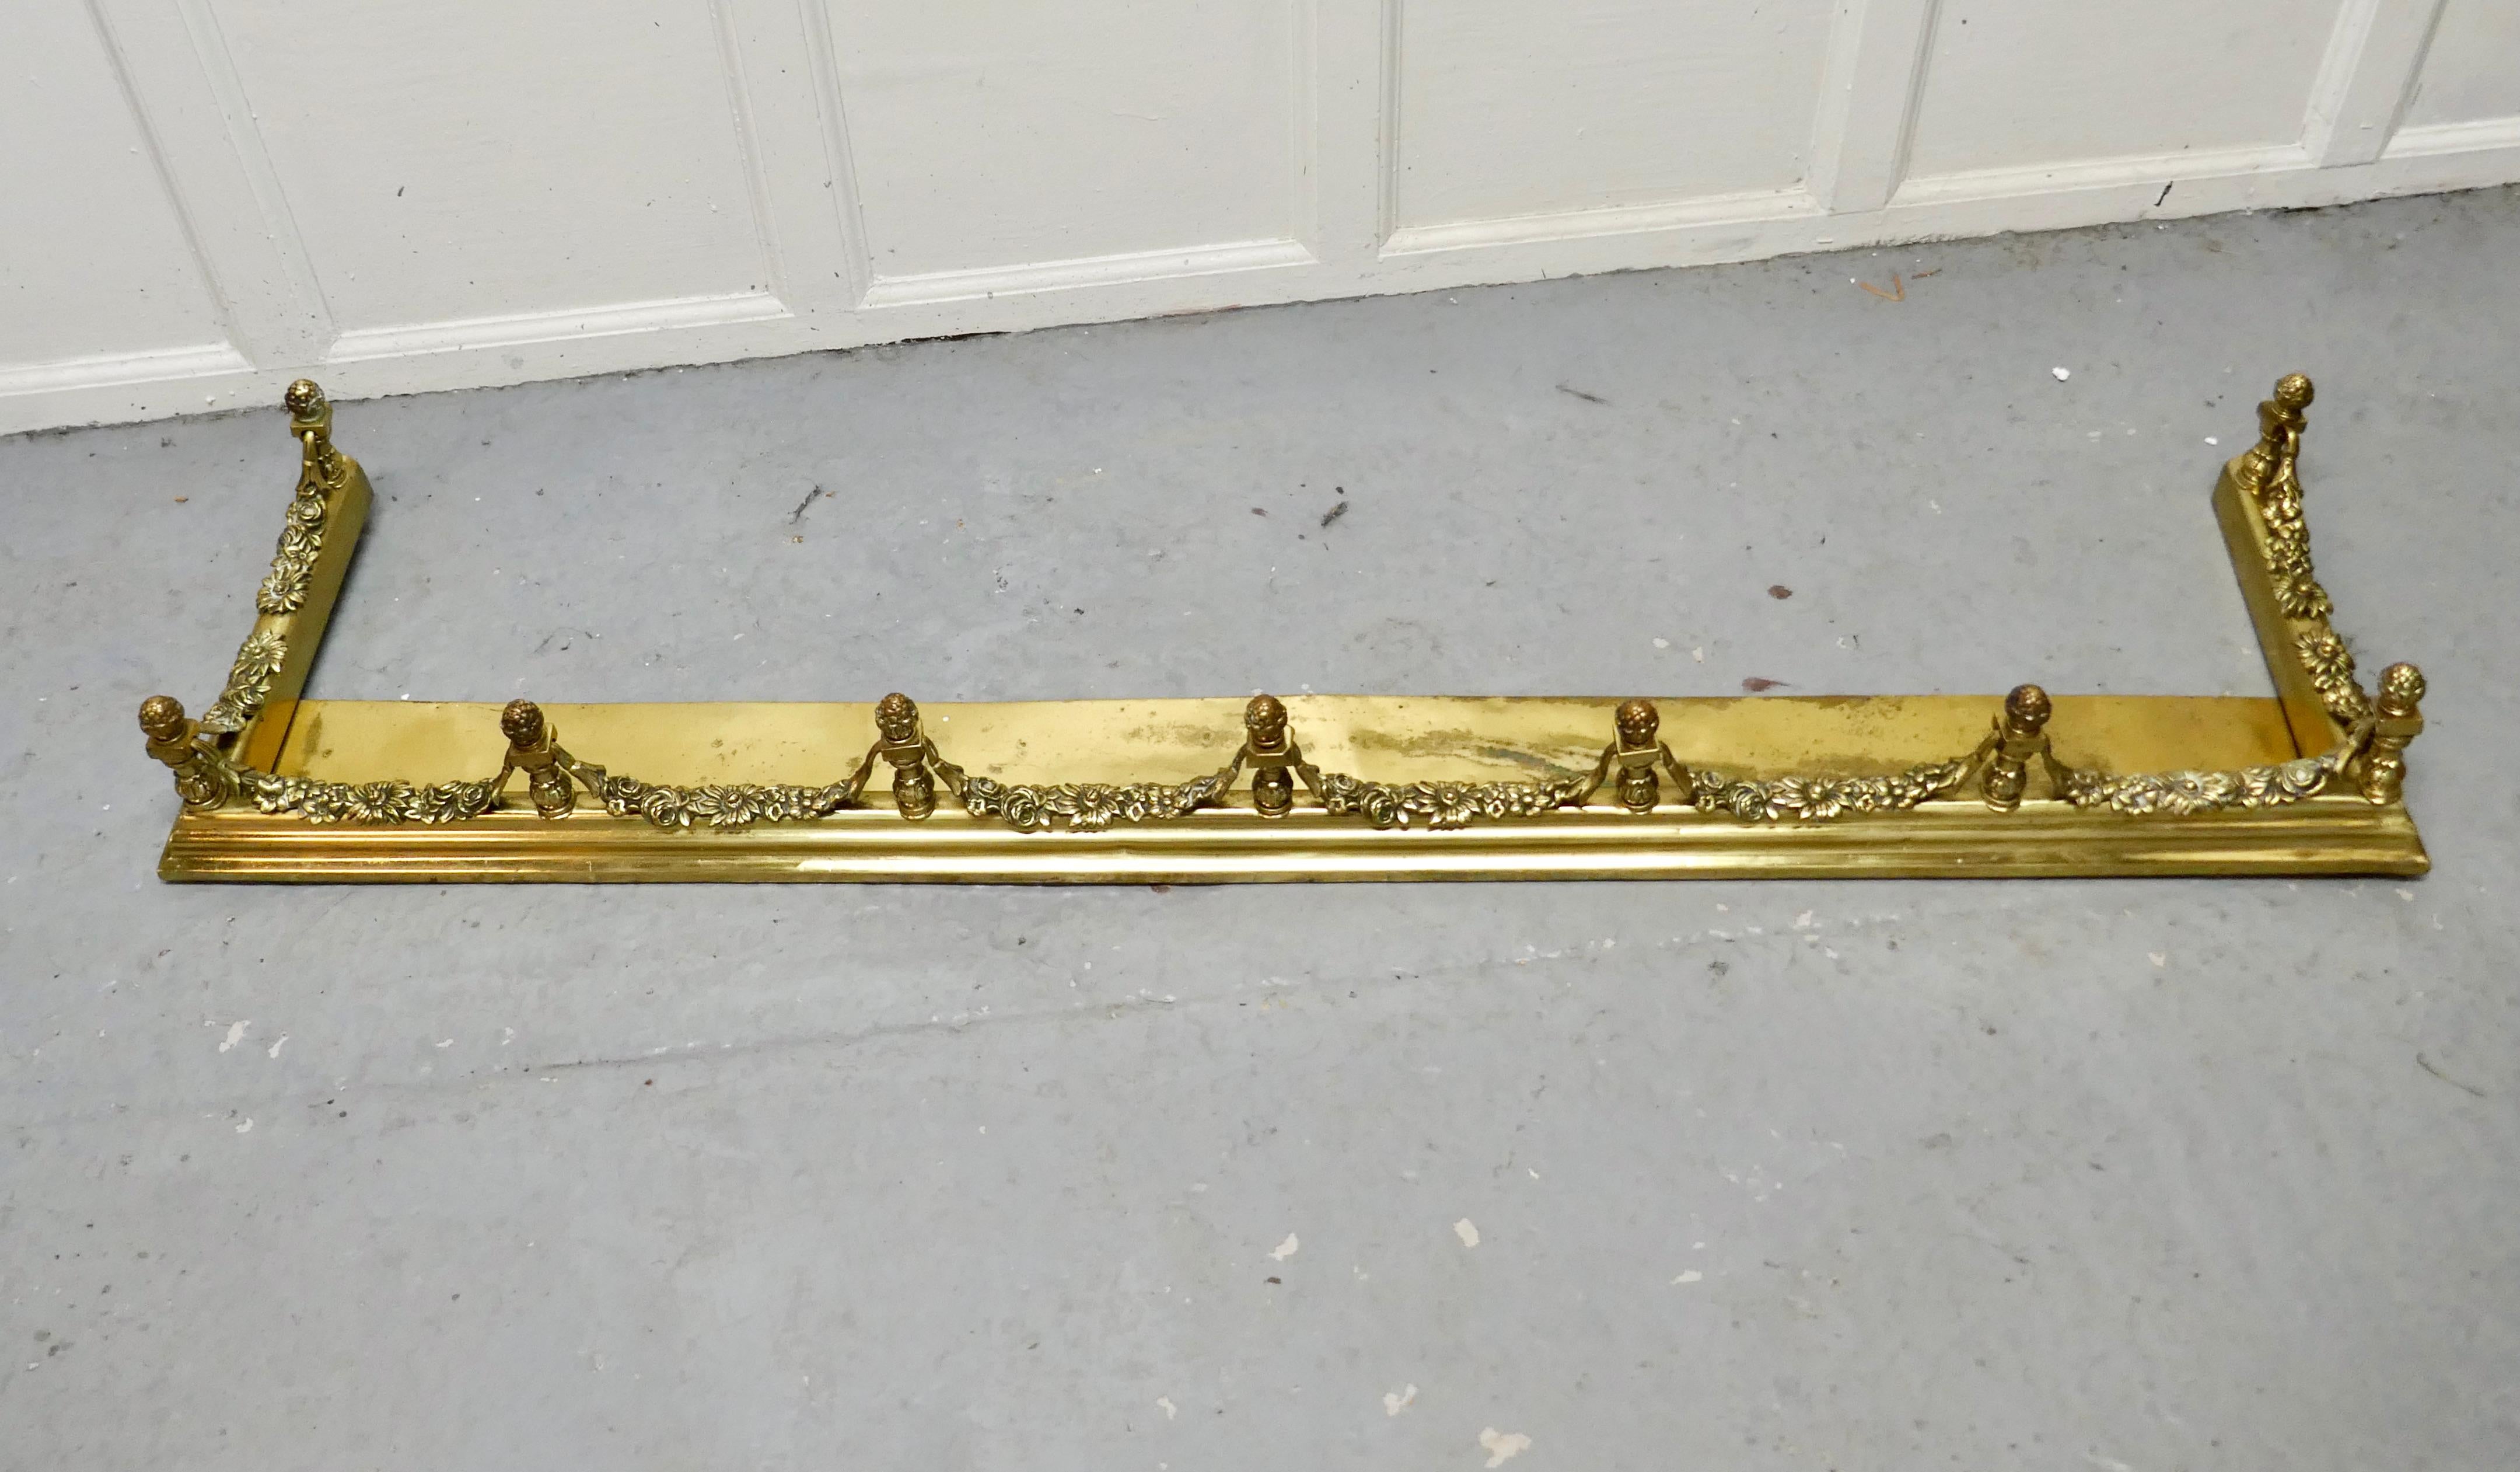 Superb quality and design 19th century heavy brass fender

This is a superb quality brass fender it has a broad base and elaborate spindles, with garlands of leafy swags this is one of the heaviest and finest quality fenders 
The fender has